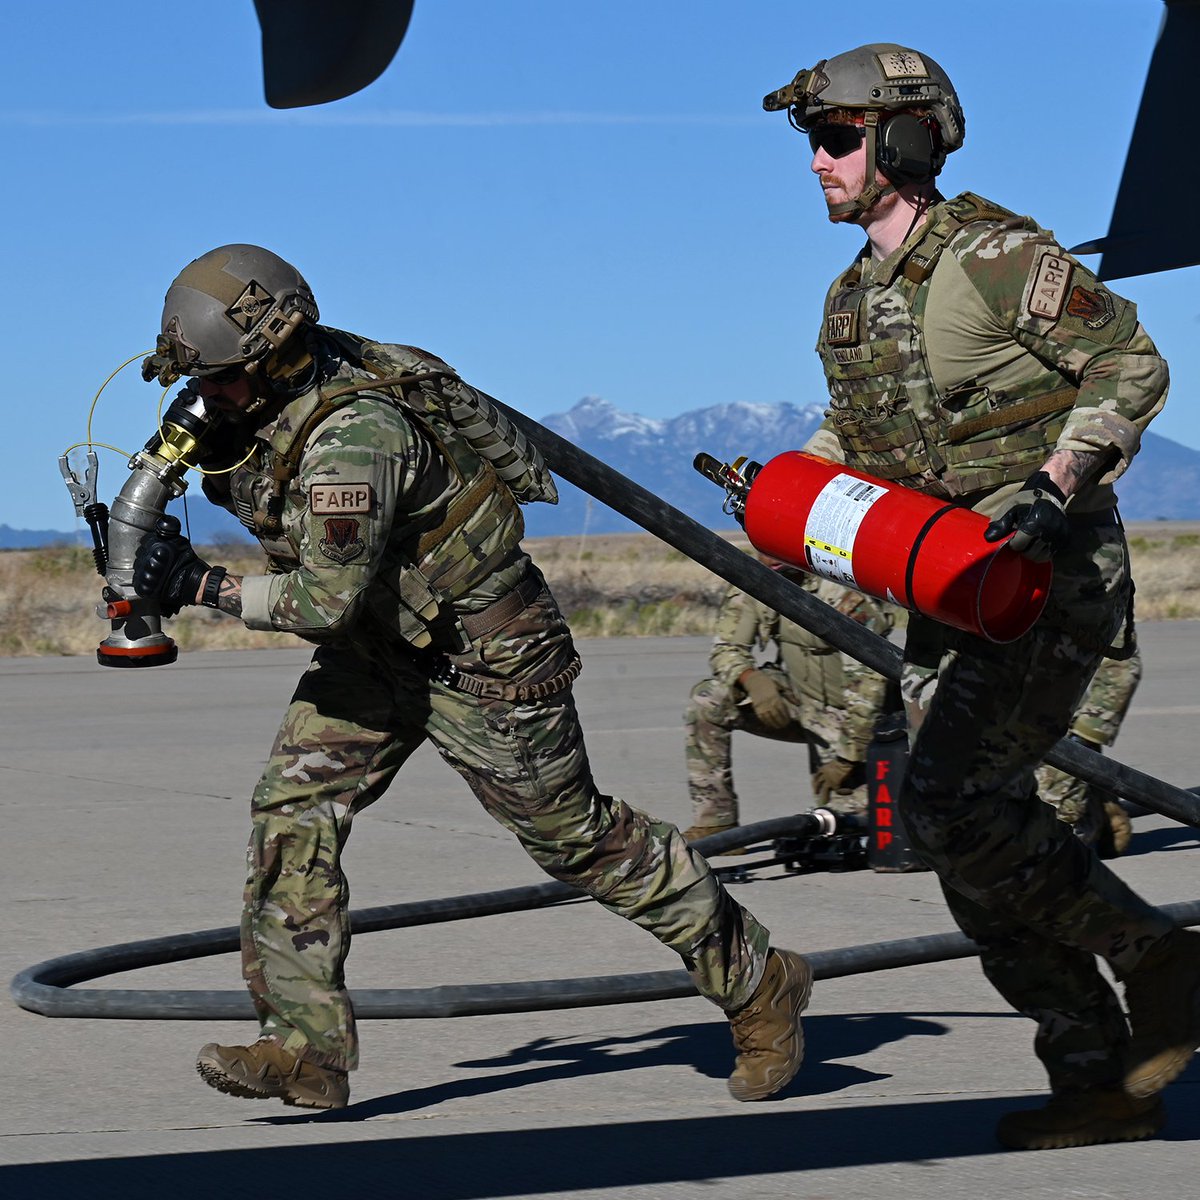 355th Logistics Readiness Squadron forward area refueling point operators expeditiously transfer fuel from a tanker aircraft into a receiver aircraft, while aircraft engines remain on⛽️